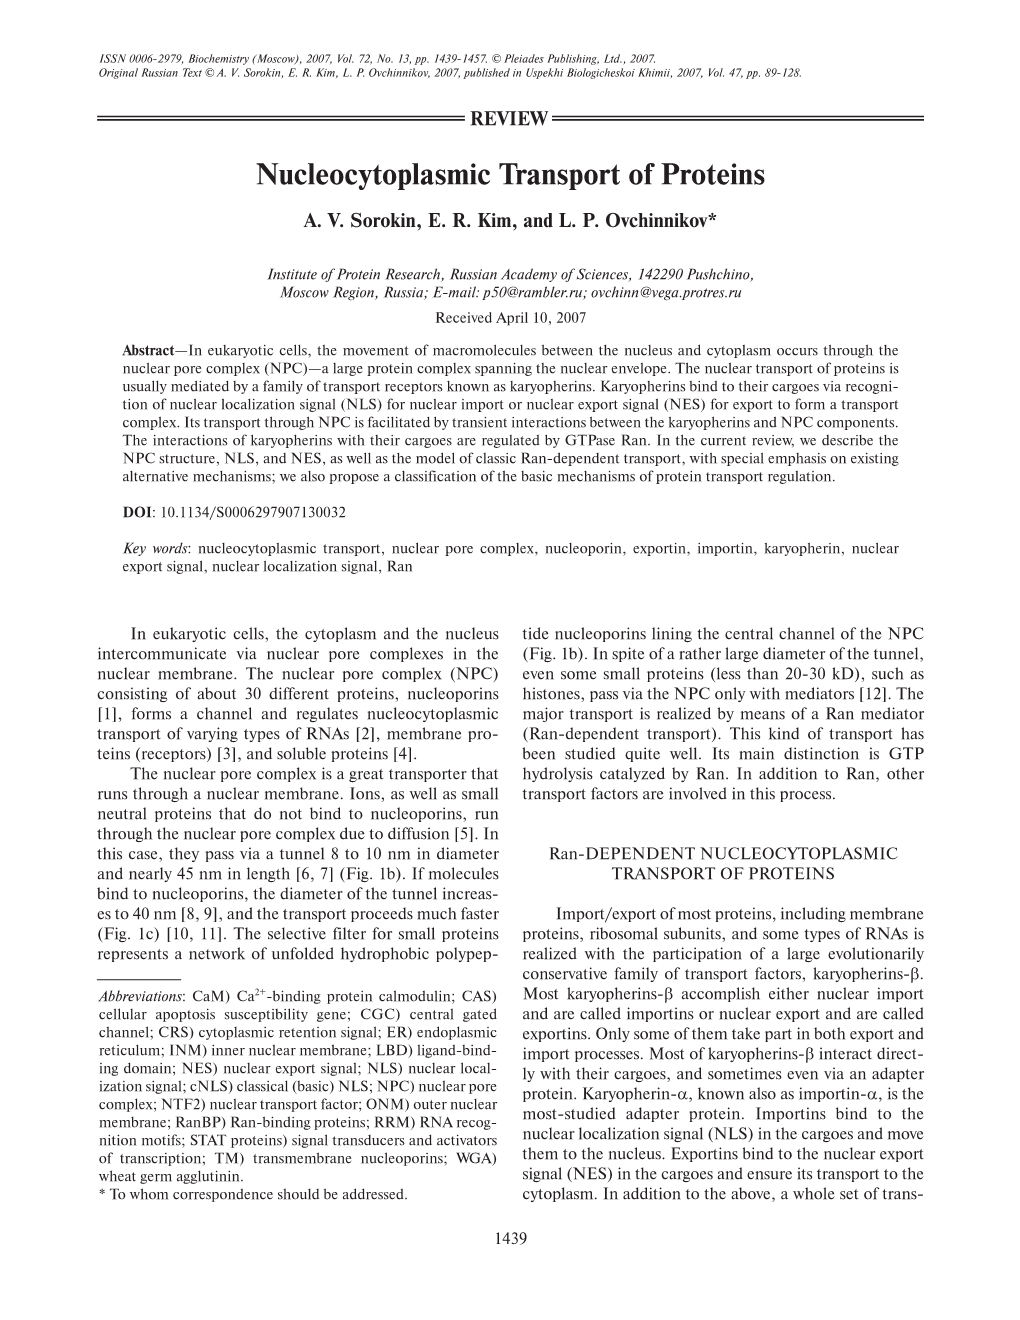 Nucleocytoplasmic Transport of Proteins